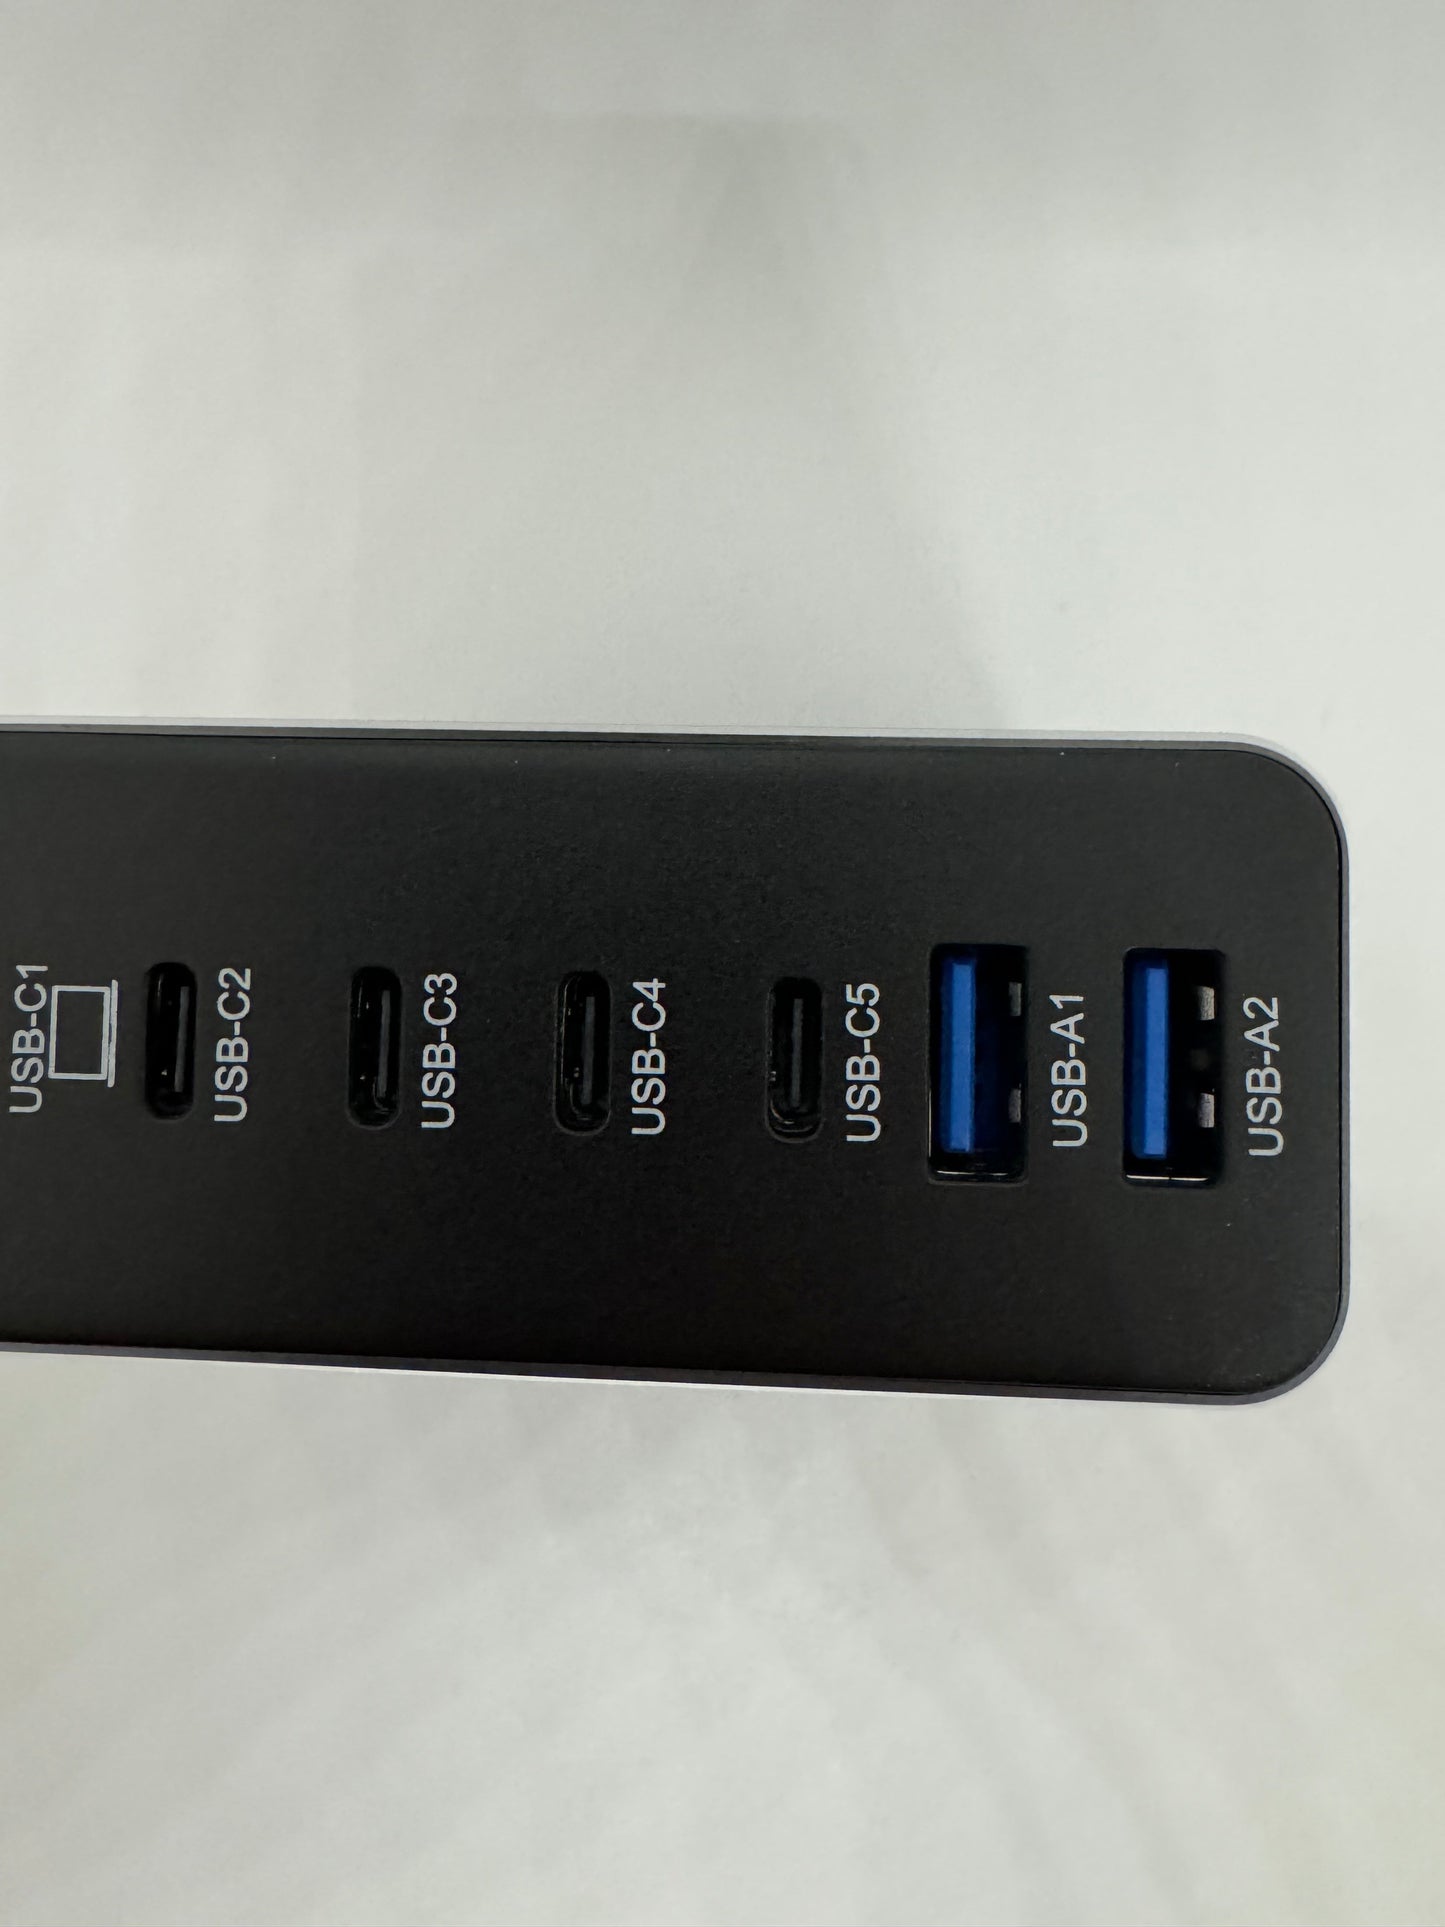 The picture shows a black device with multiple USB ports. The device is rectangular and has a matte finish. There are seven USB ports in total. The ports are labeled from left to right as follows:- USB-C1- USB-C2- USB-C3- USB-C4- USB-C5- USB-A1- USB-A2The first five ports (USB-C1 to USB-C5) are smaller and have a rectangular shape with rounded corners. The last two ports (USB-A1 and USB-A2) are slightly larger and have a rectangular shape. The background is white.